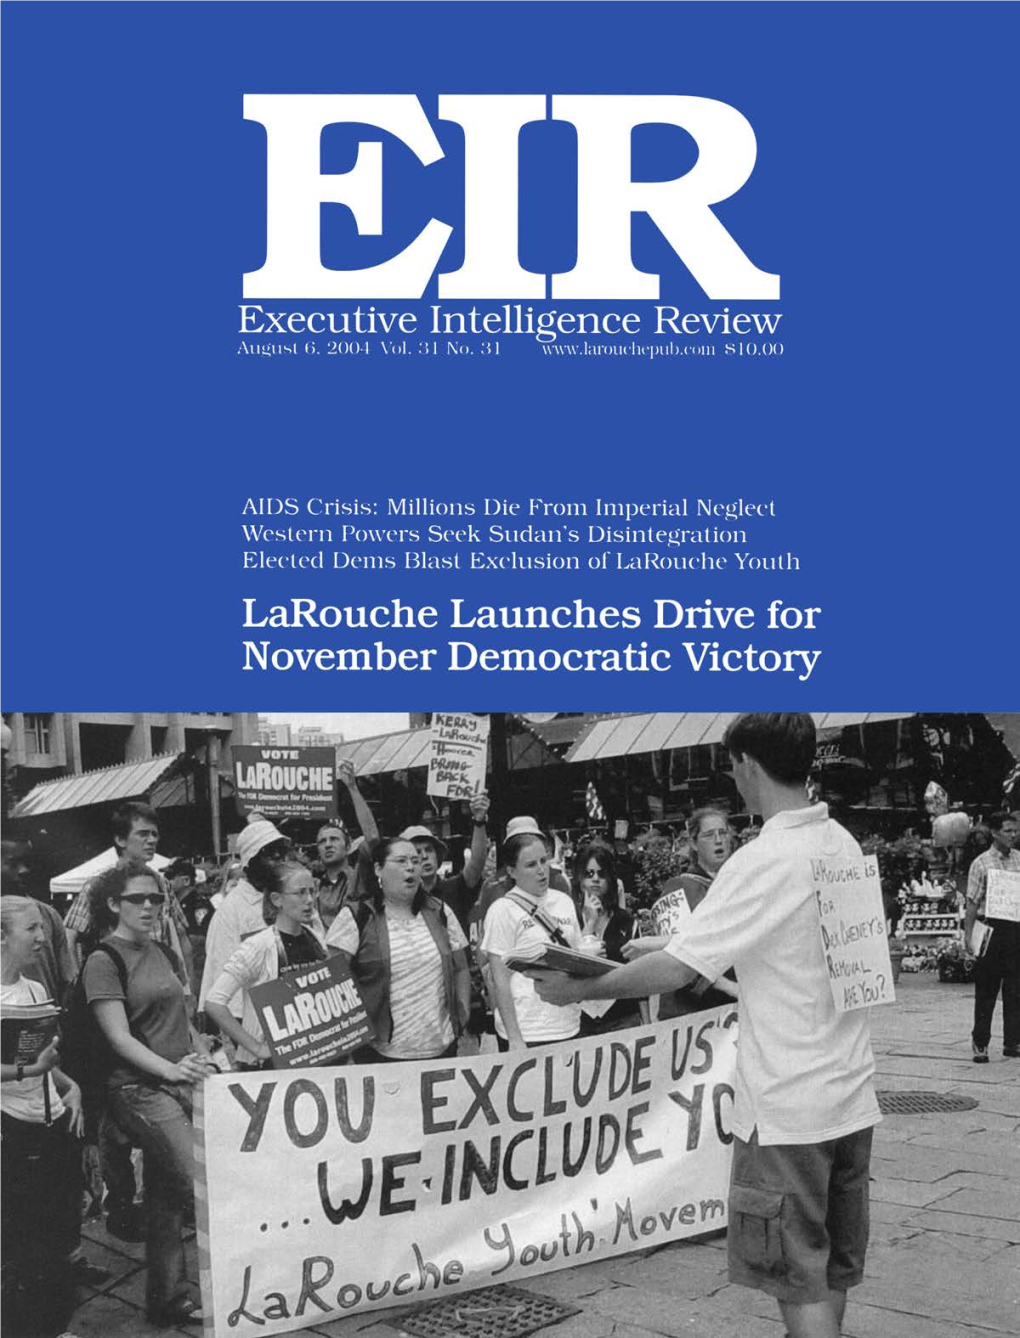 Executive Intelligence Review, Volume 31, Number 31, August 6